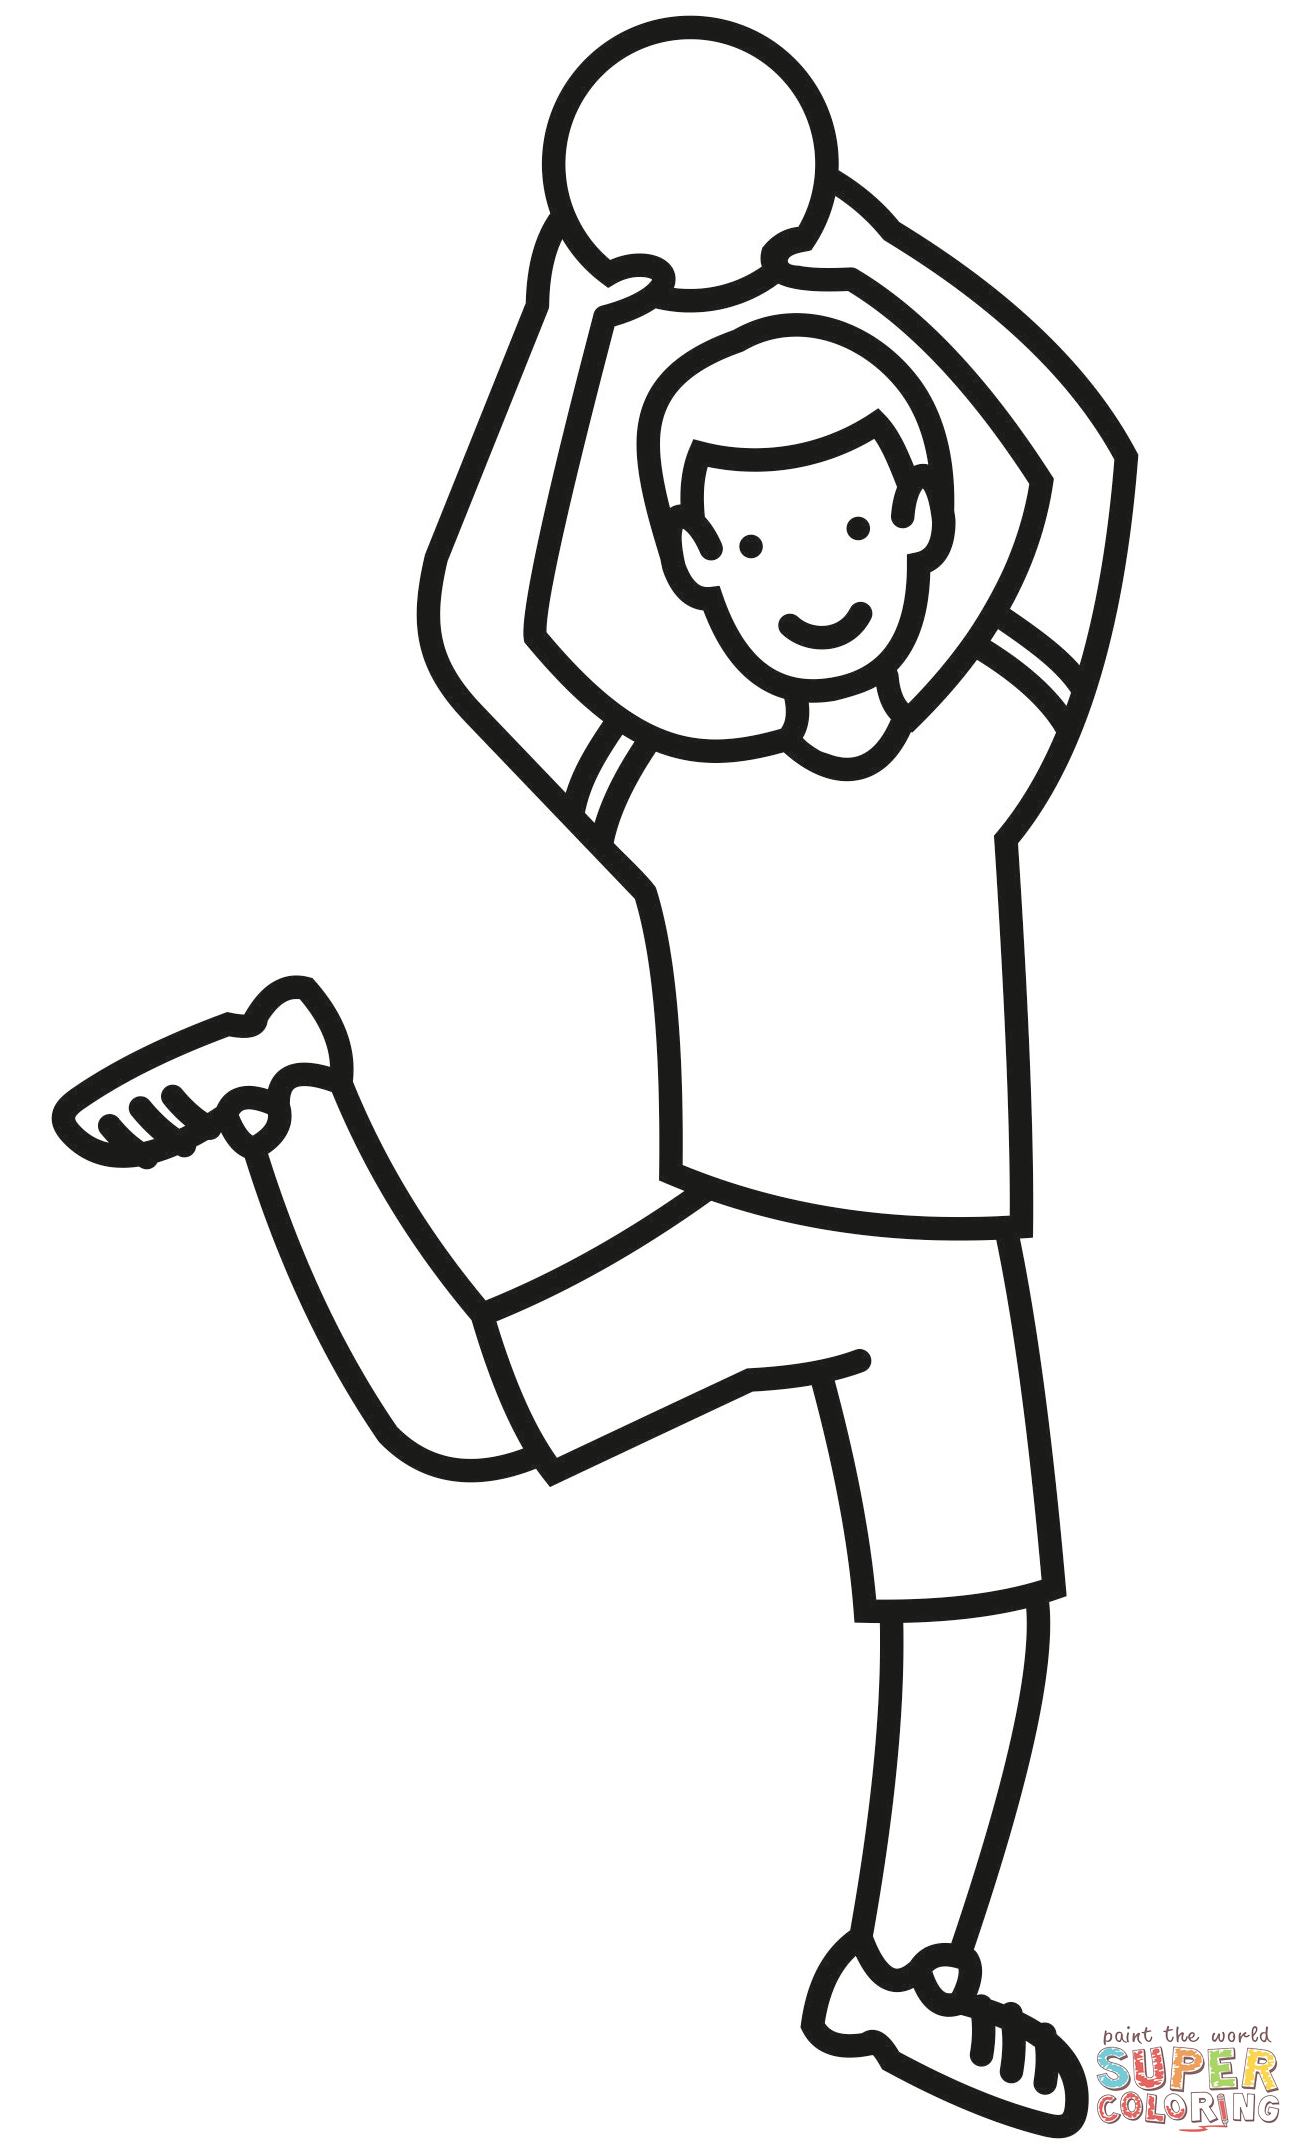 Dodgeball coloring page free printable coloring pages